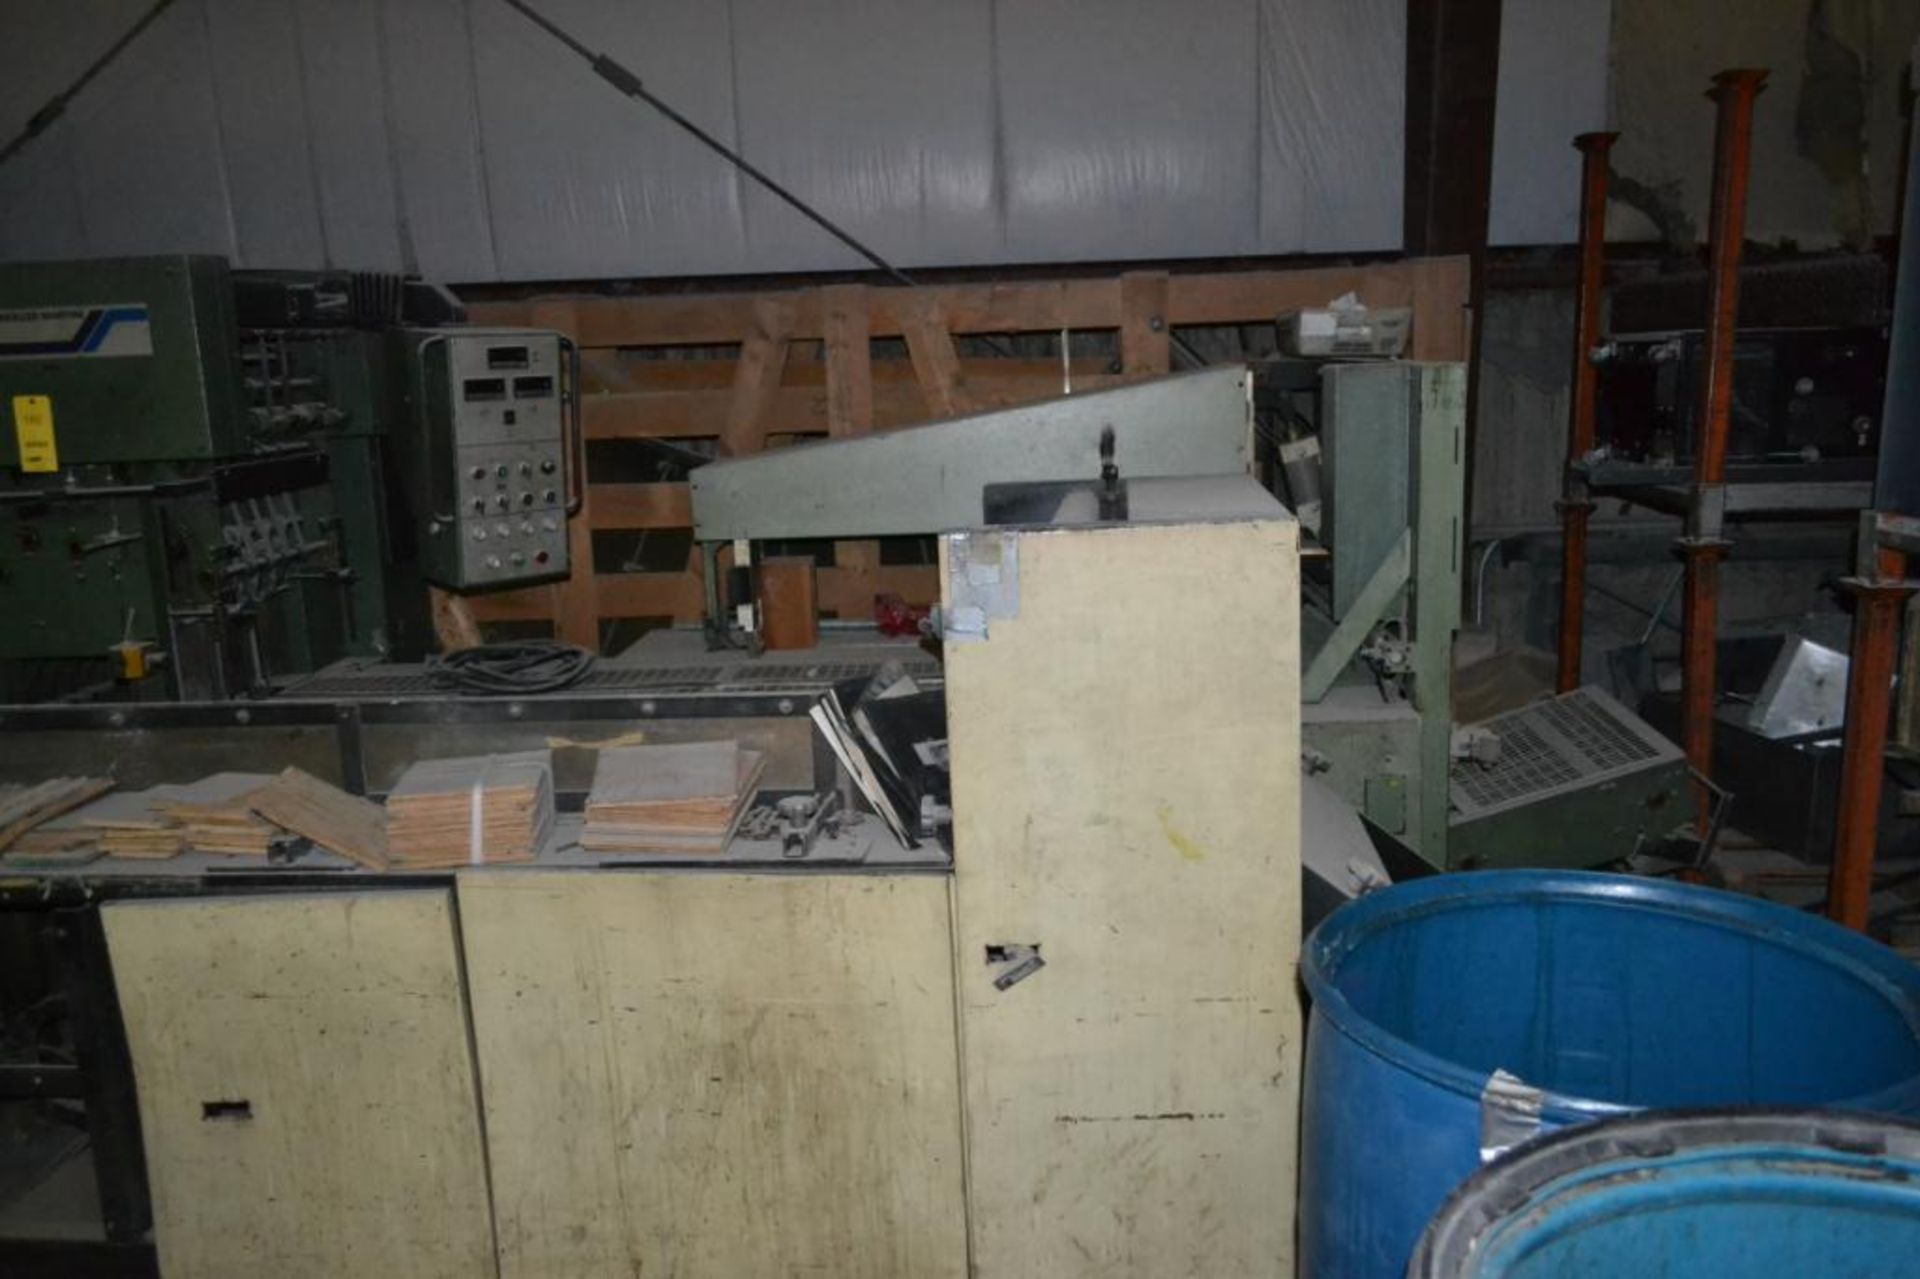 LOT: Muller Martini Parts Machines, with Conveyor - Image 2 of 2